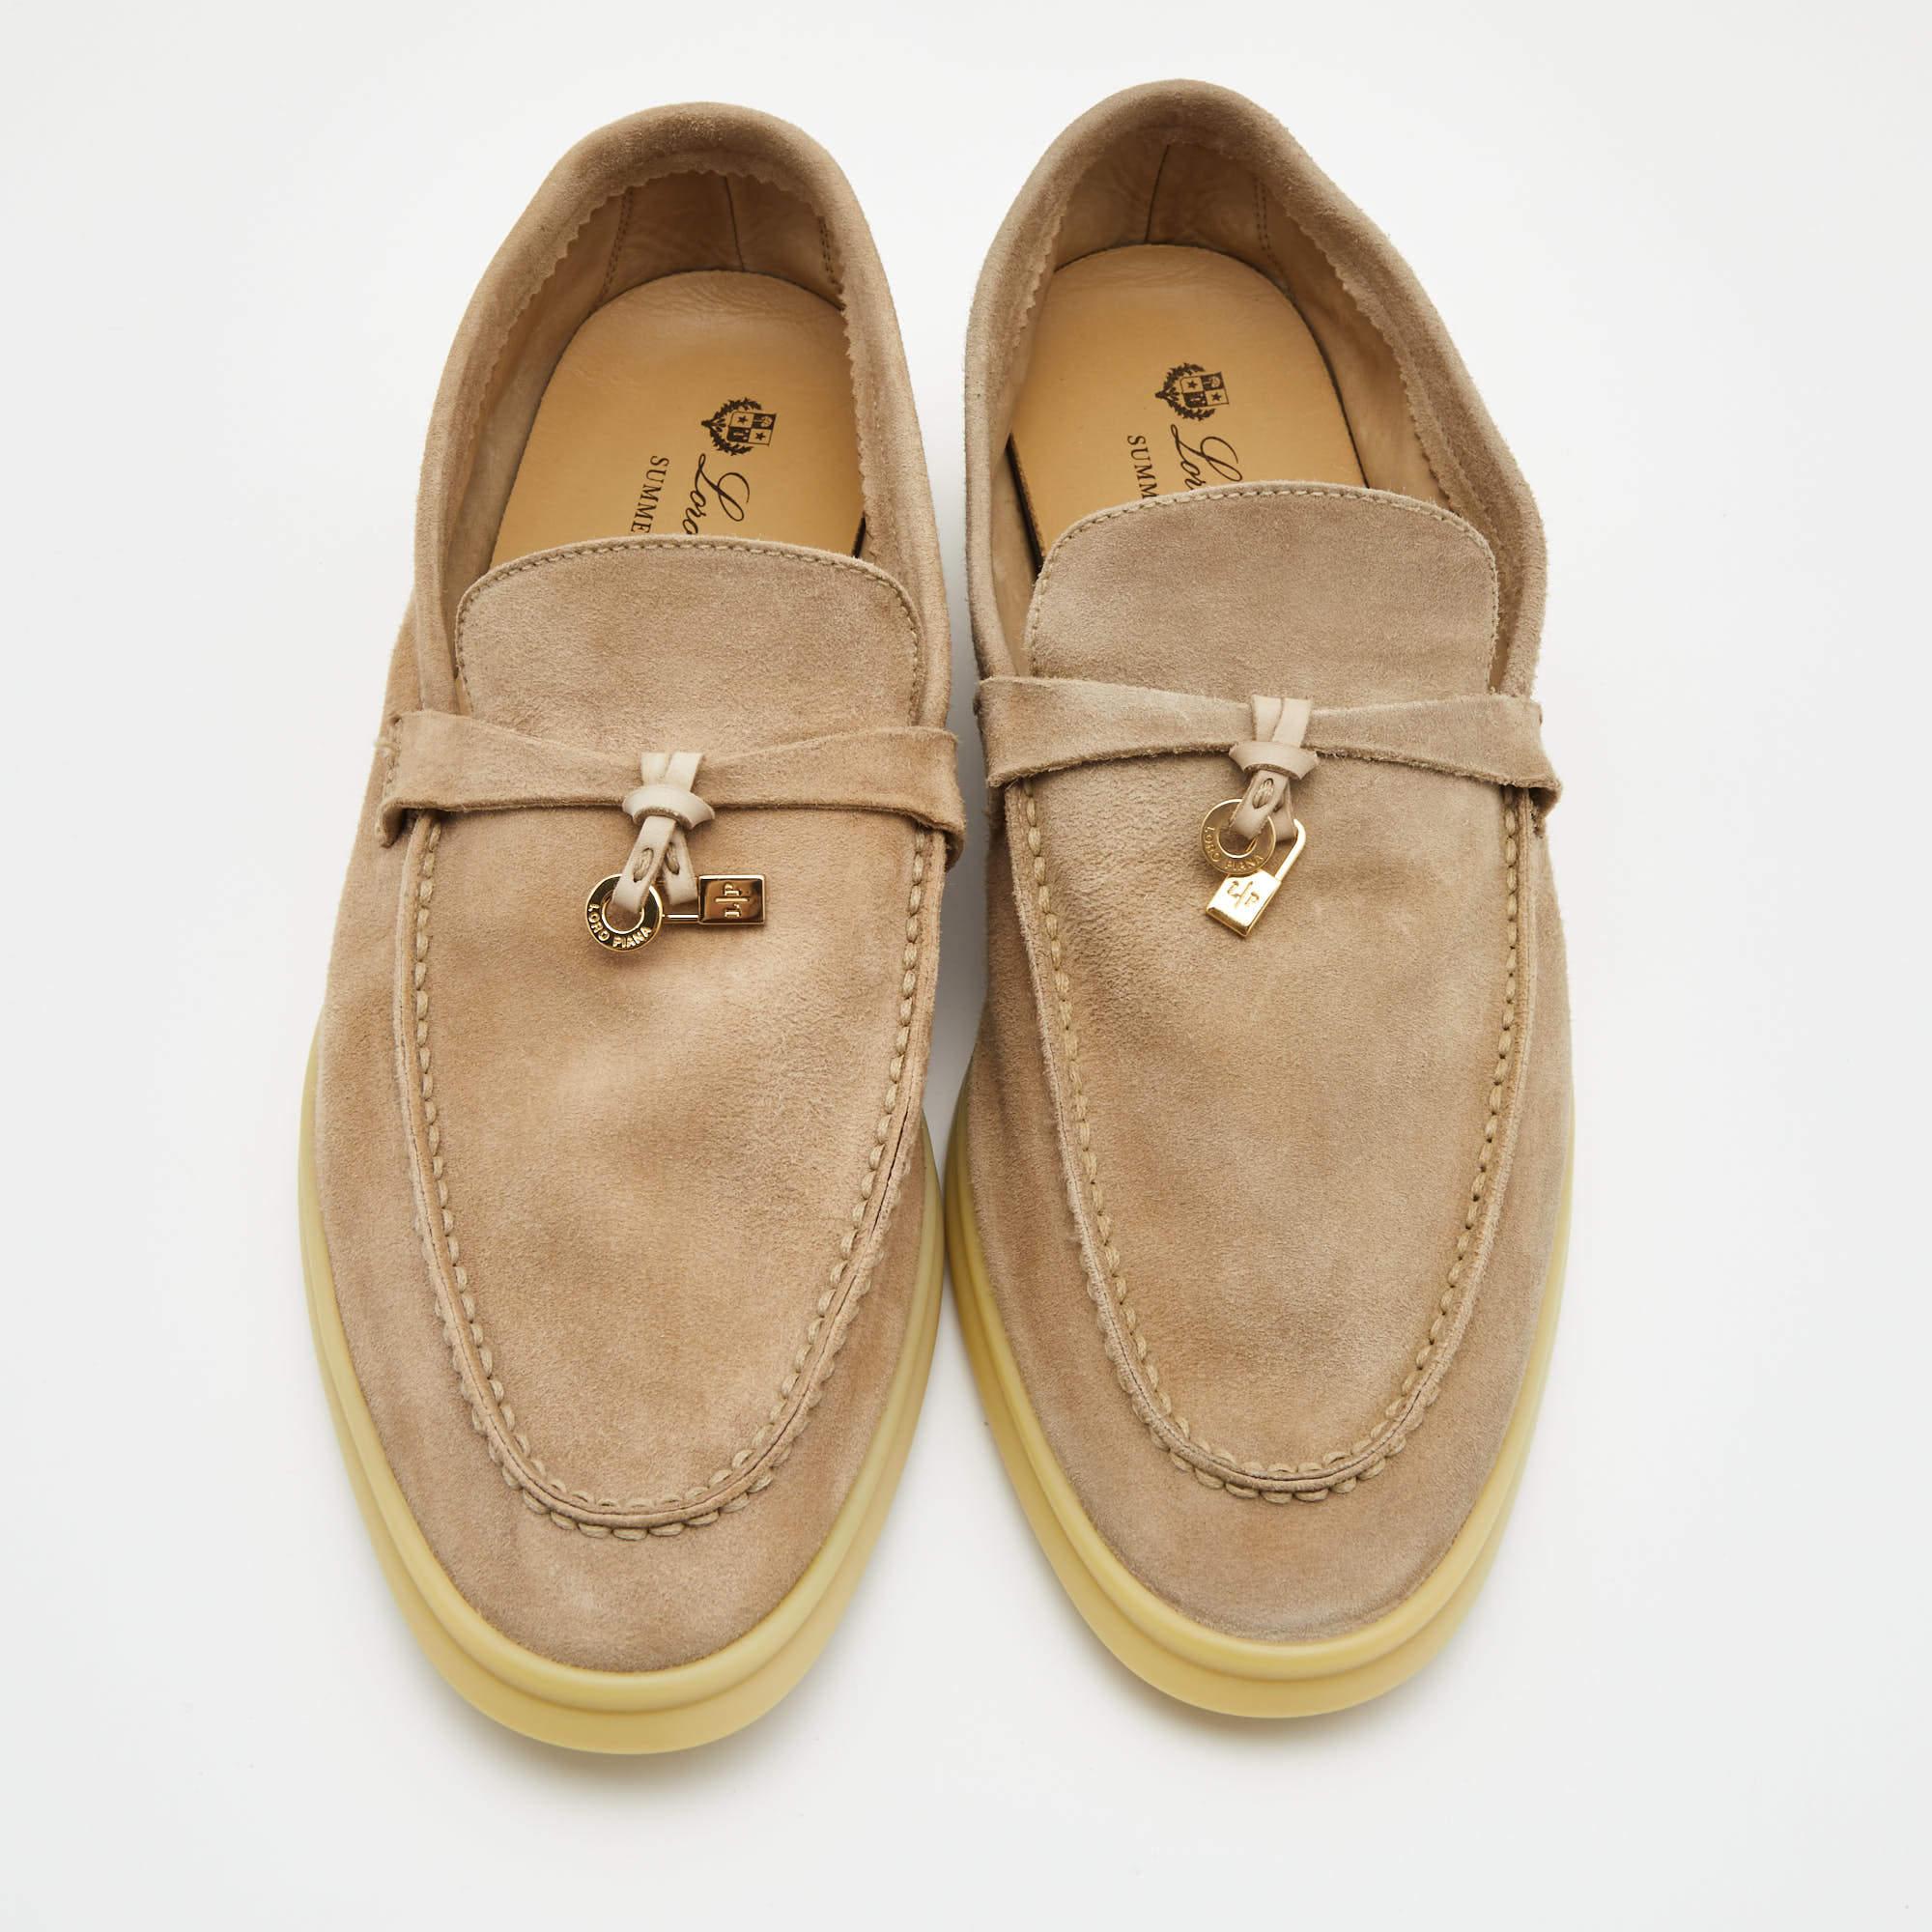 These sophisticated Summer Walk loafers from Loro Piana are crafted from suede and feature a neat design with sleek cuts. They flaunt round toes, signature charms, a beige hue, comfortable leather-lined insoles, and durable rubber